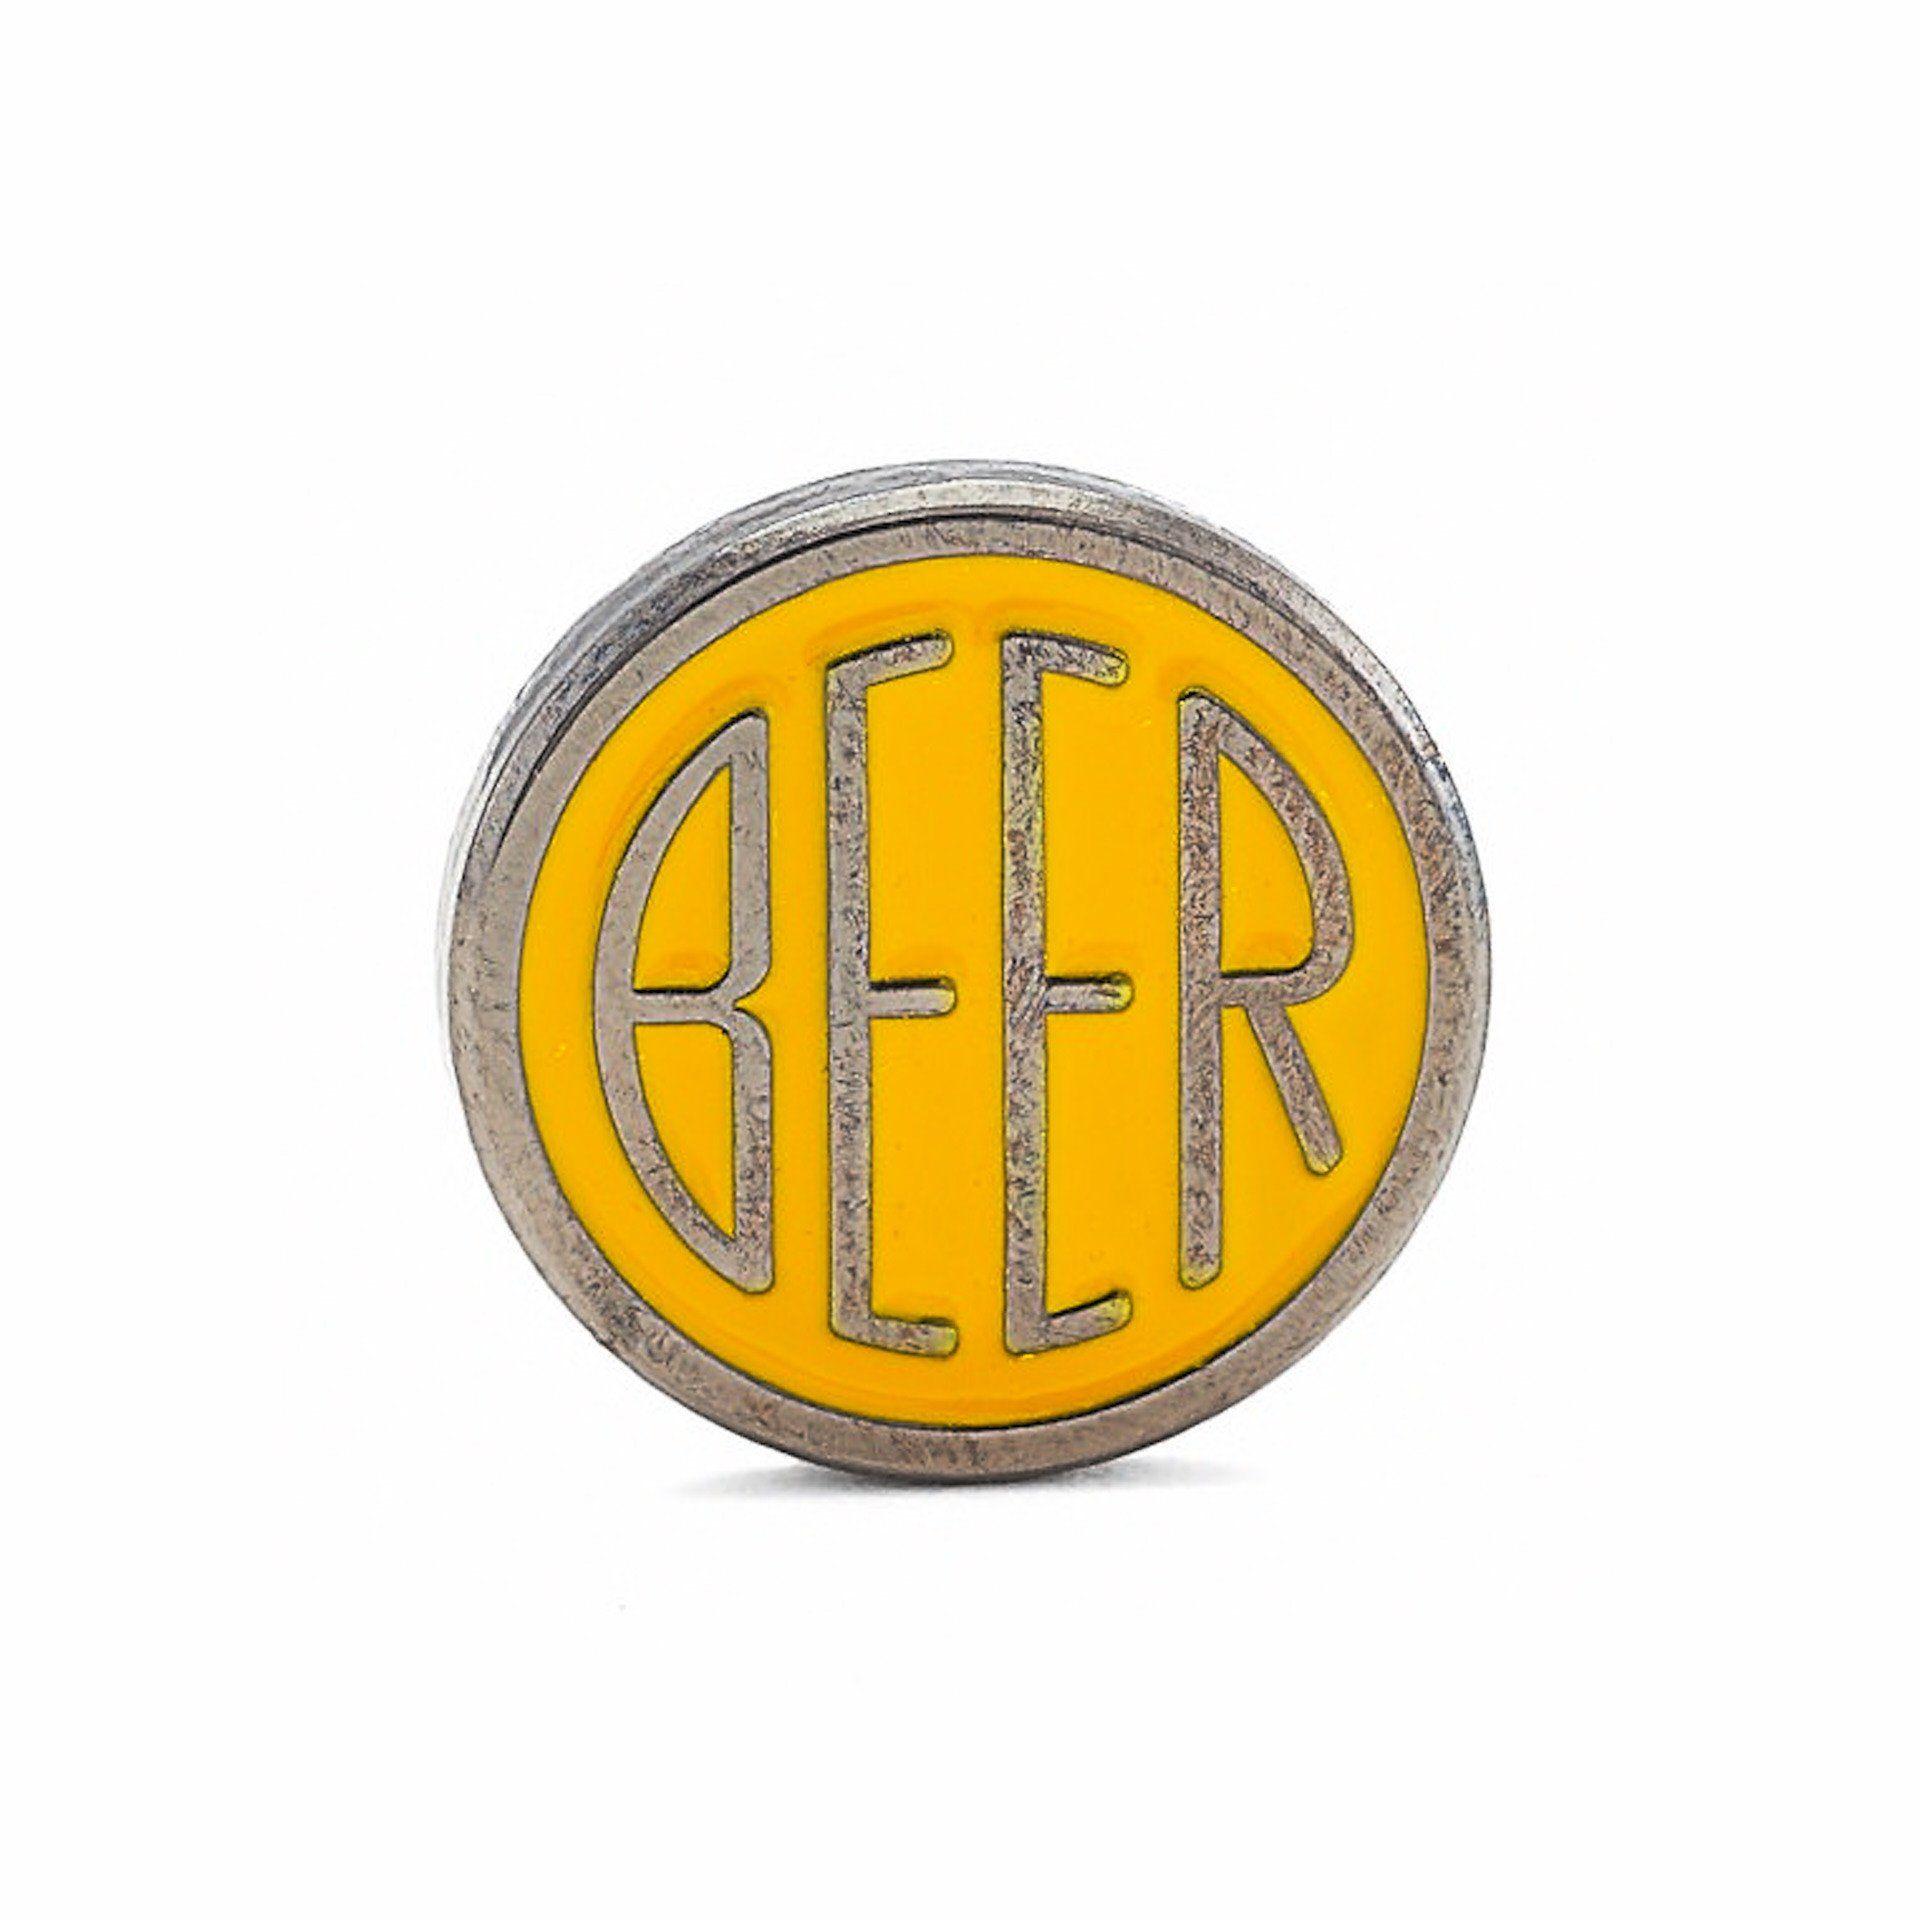 Black with a Dot of Yellow I Logo - BEER Dot Enamel Lapel Pin - Yellow - Brewery Outfitters